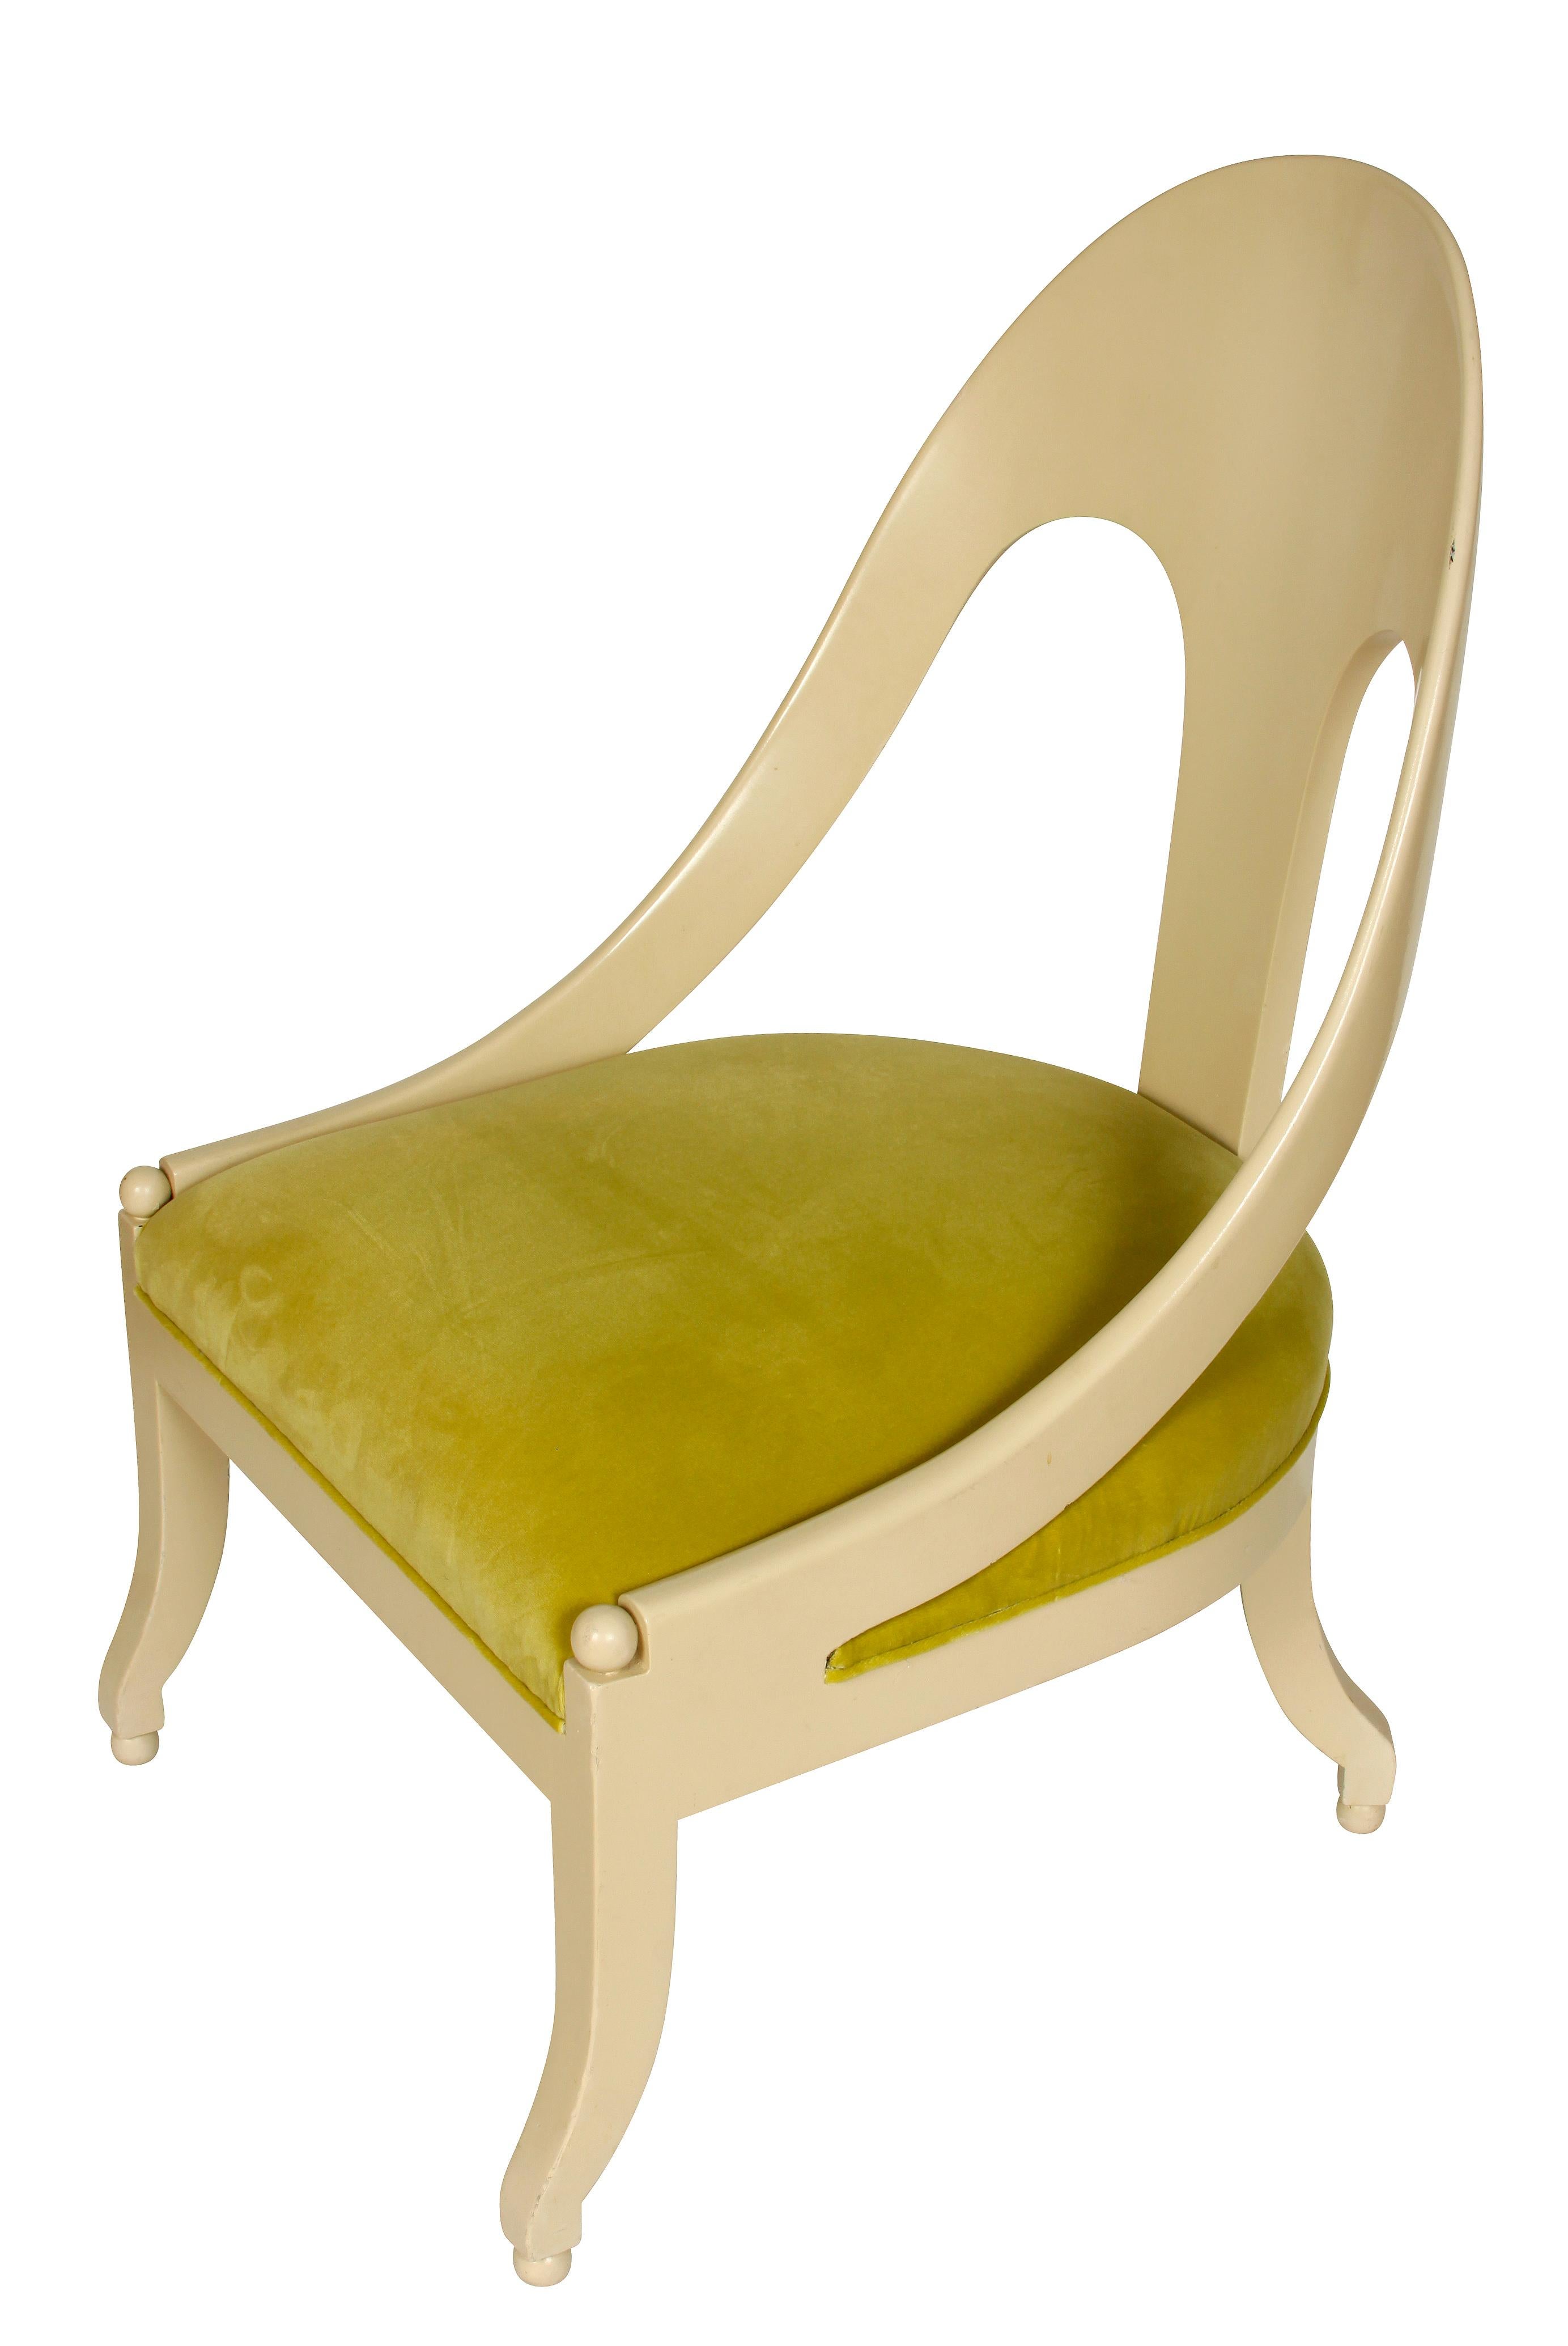 taylor dining chair